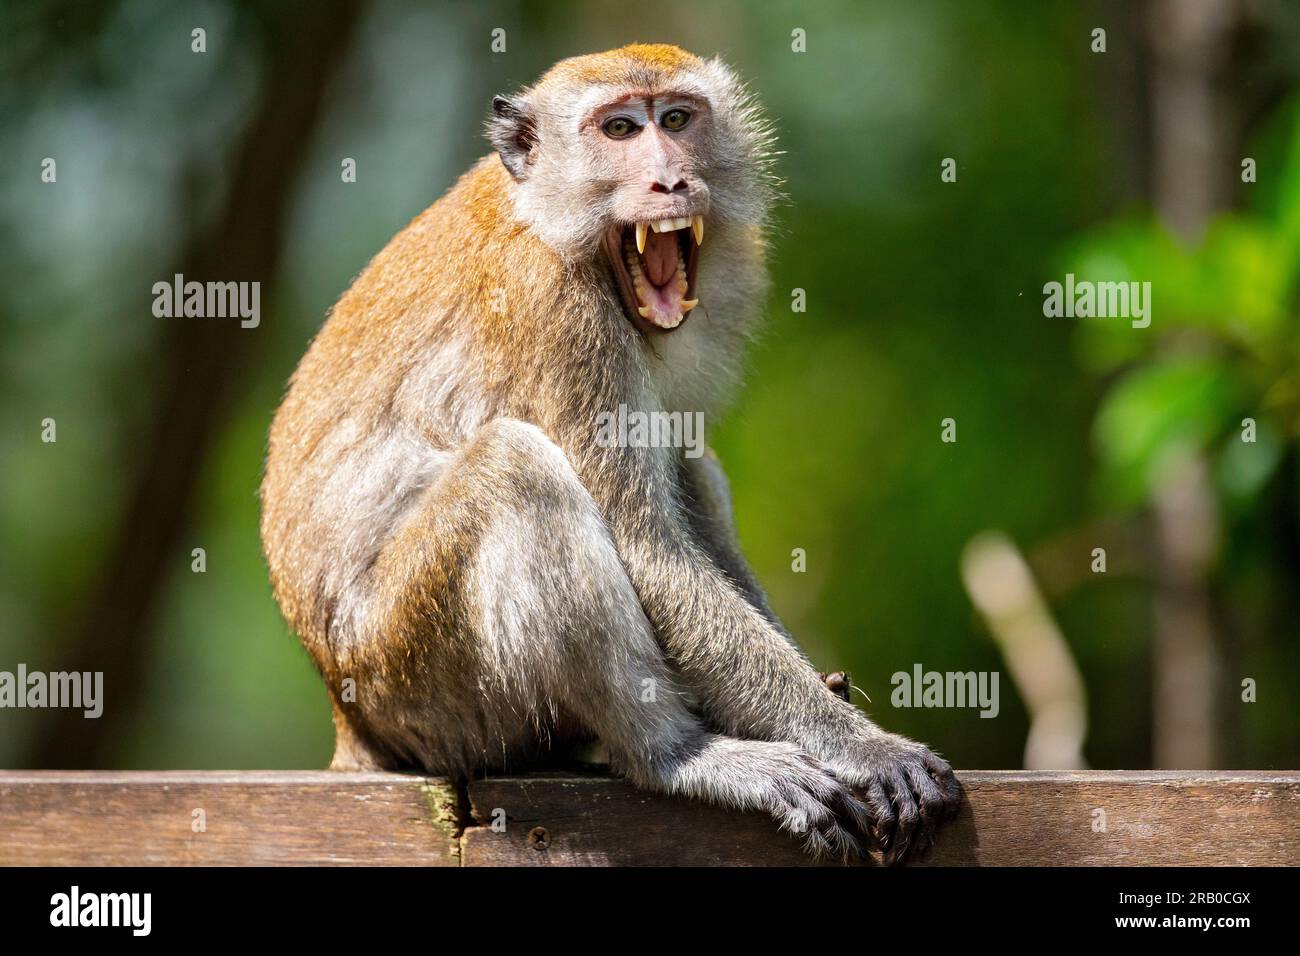 Adult long tailed macaque yawning while resting on a mangrove boardwalk balustrade, Singapore Stock Photo